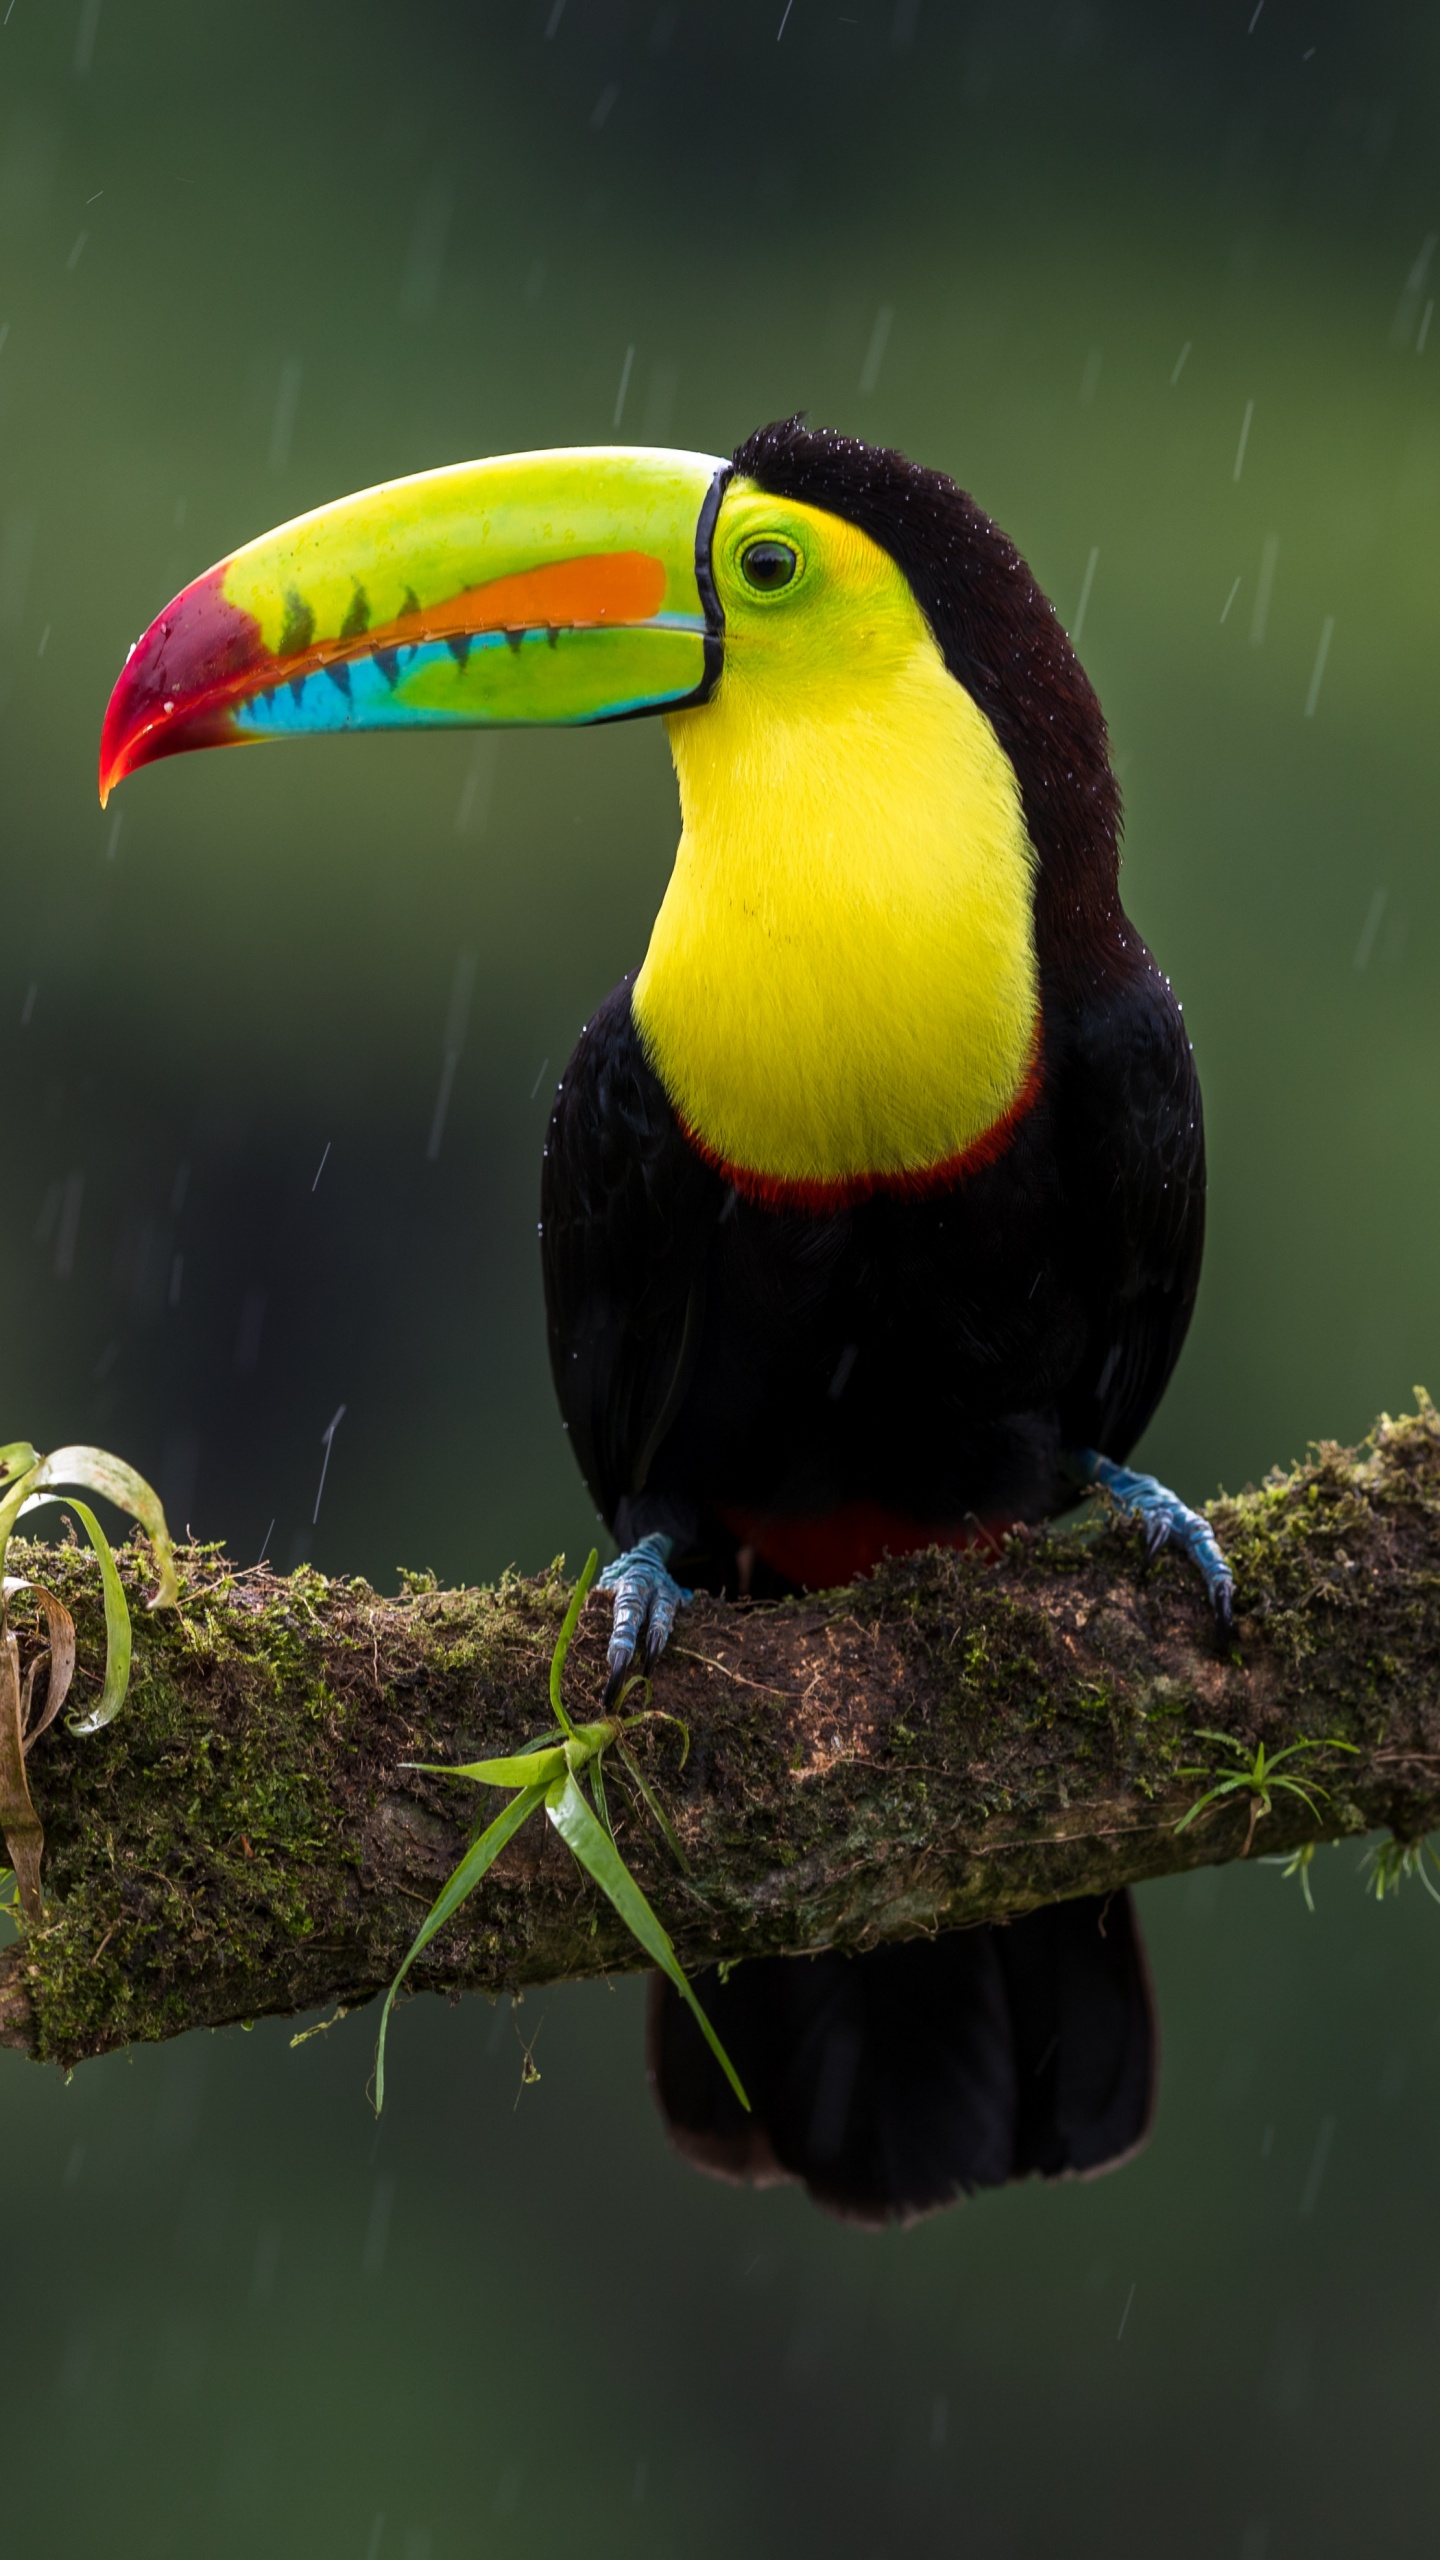 Black Yellow and Red Bird on Tree Branch. Wallpaper in 1440x2560 Resolution